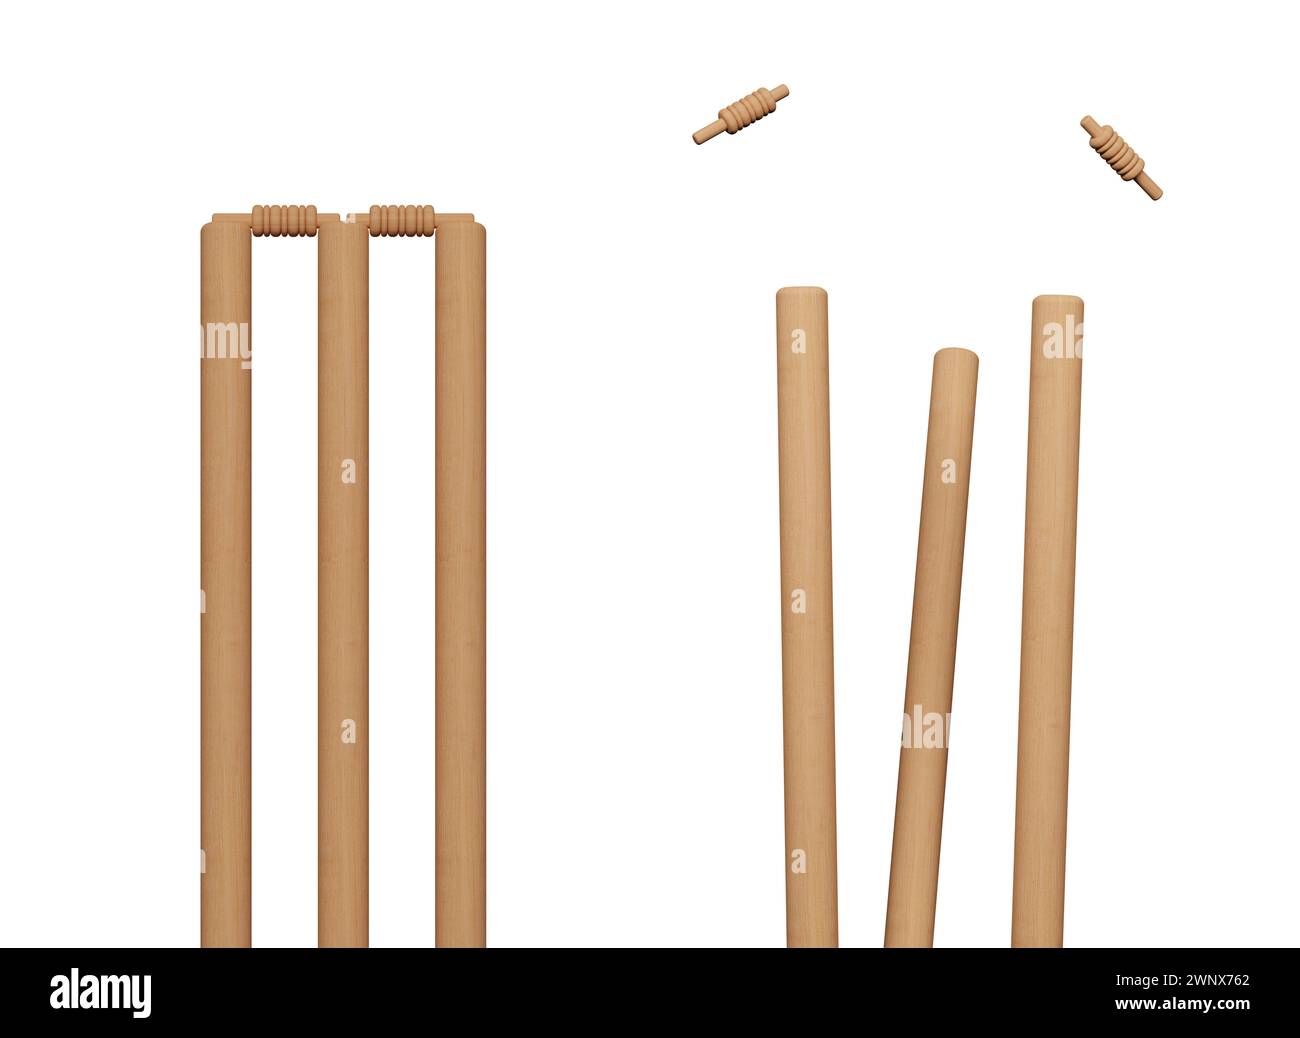 Cricket ball hitting wicket stumps knocking bails out against blue sky background. Bails fly from cricket stumps as ball hits on grass field. Close-up Stock Photo